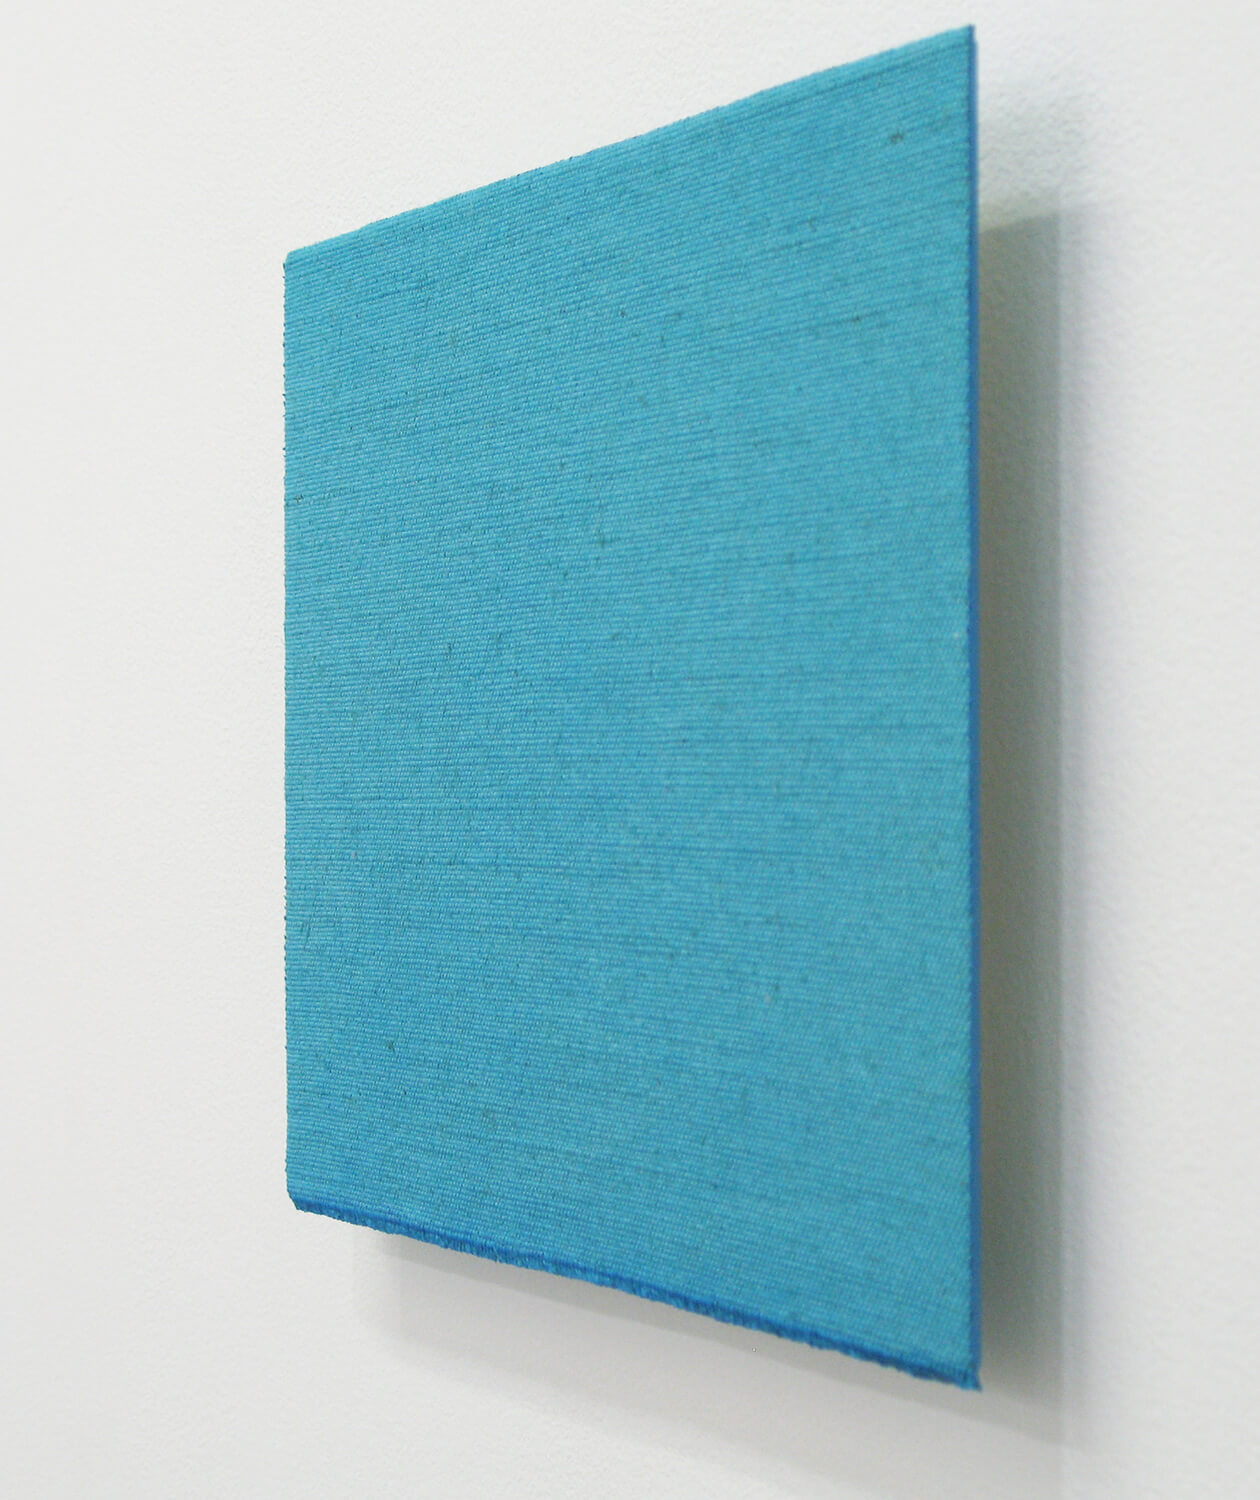 Text No. 803 / acrylic, ink on canvas on mdf, 227 x 295 x 20 mm each, 2011